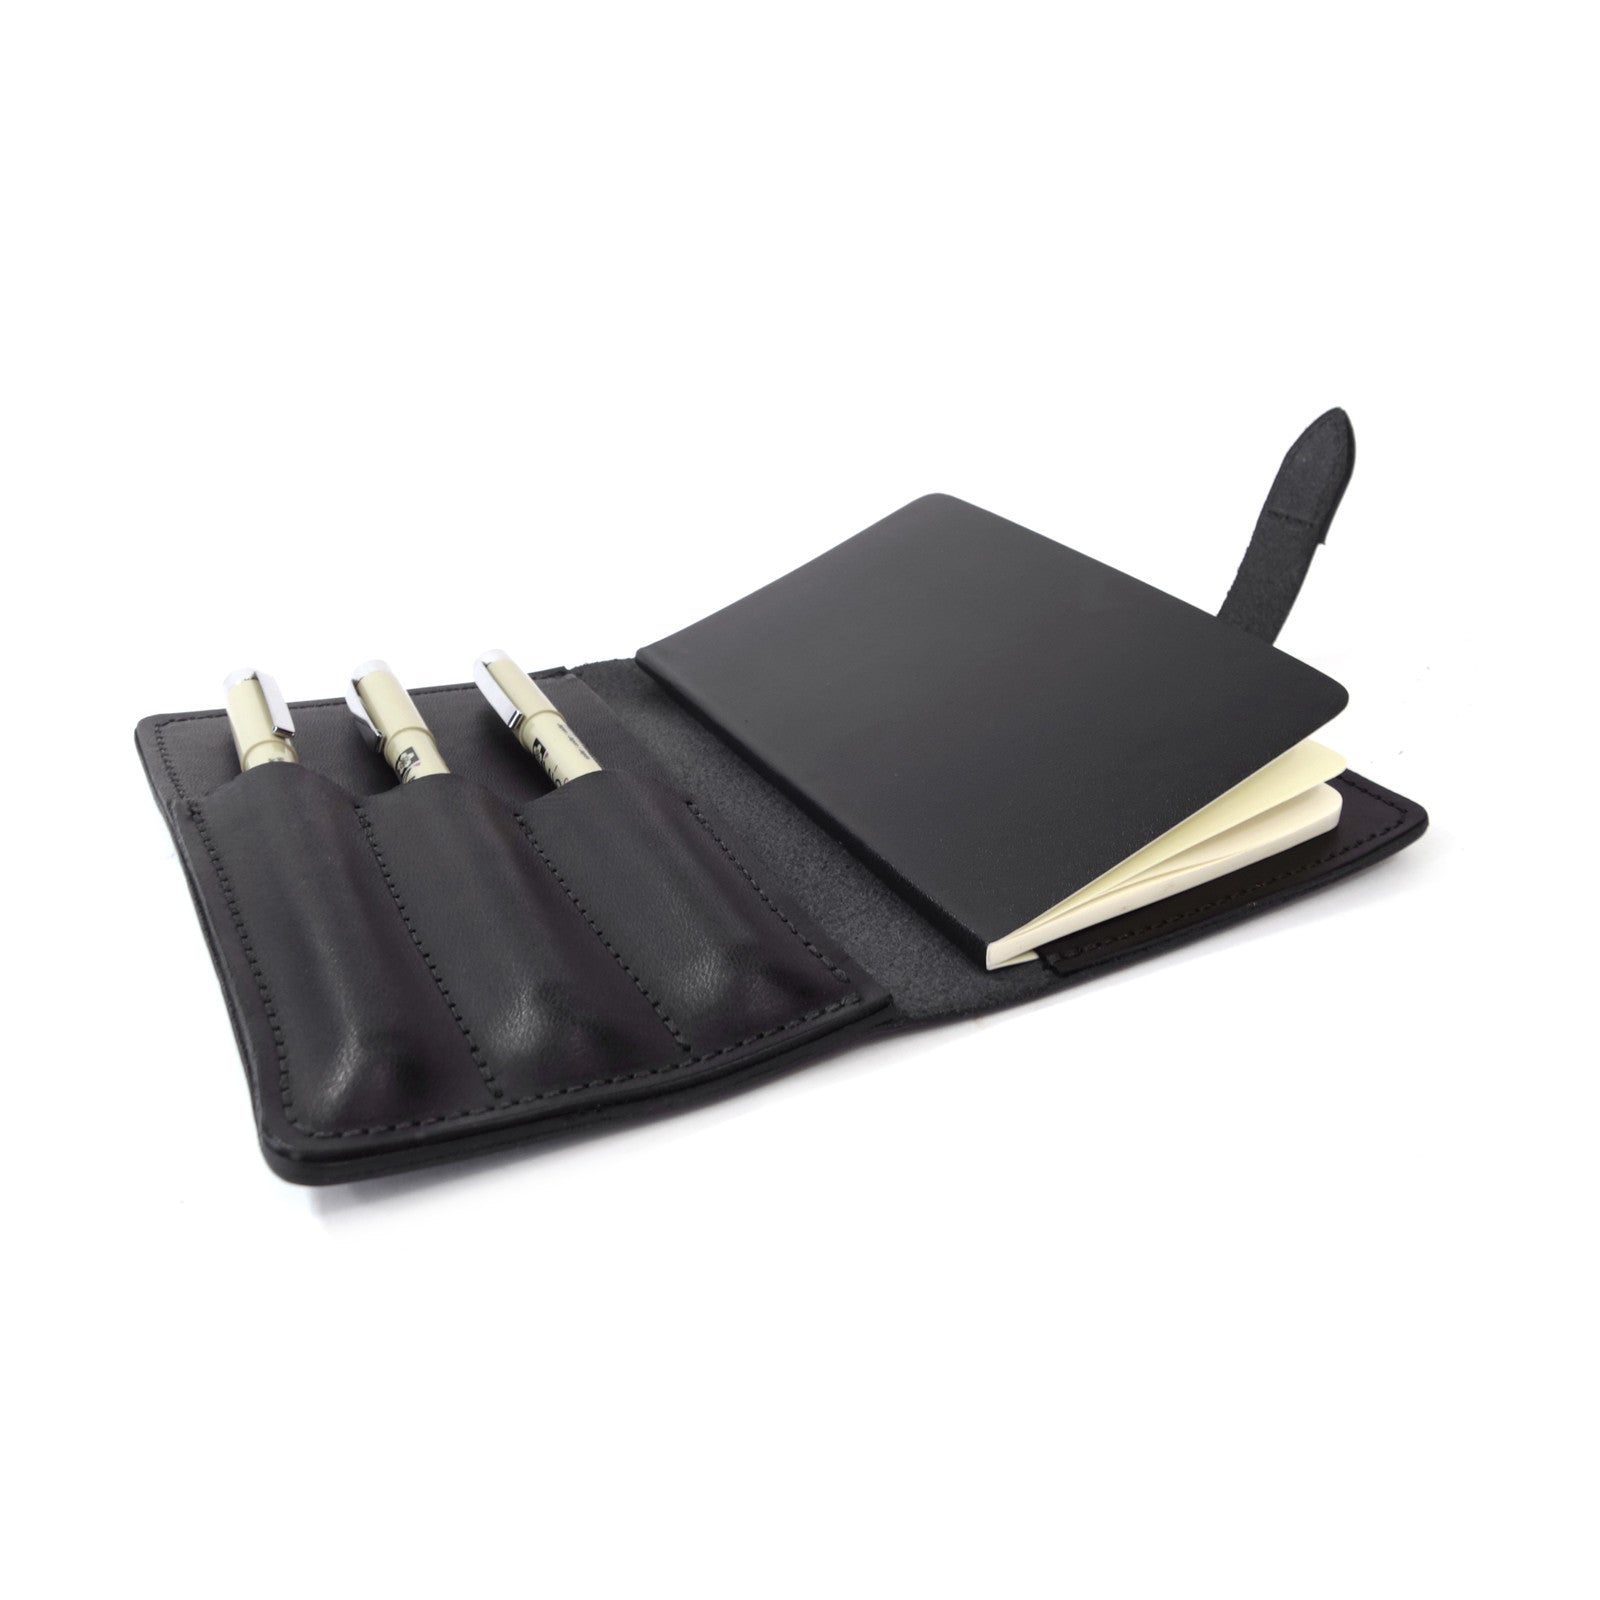 Leather Art Kit, Leather notebook, The Journeyman Art Kit is made with Herman Oak leather. Moleskine notebook and 3 micron pens for a complete traveling art kit.